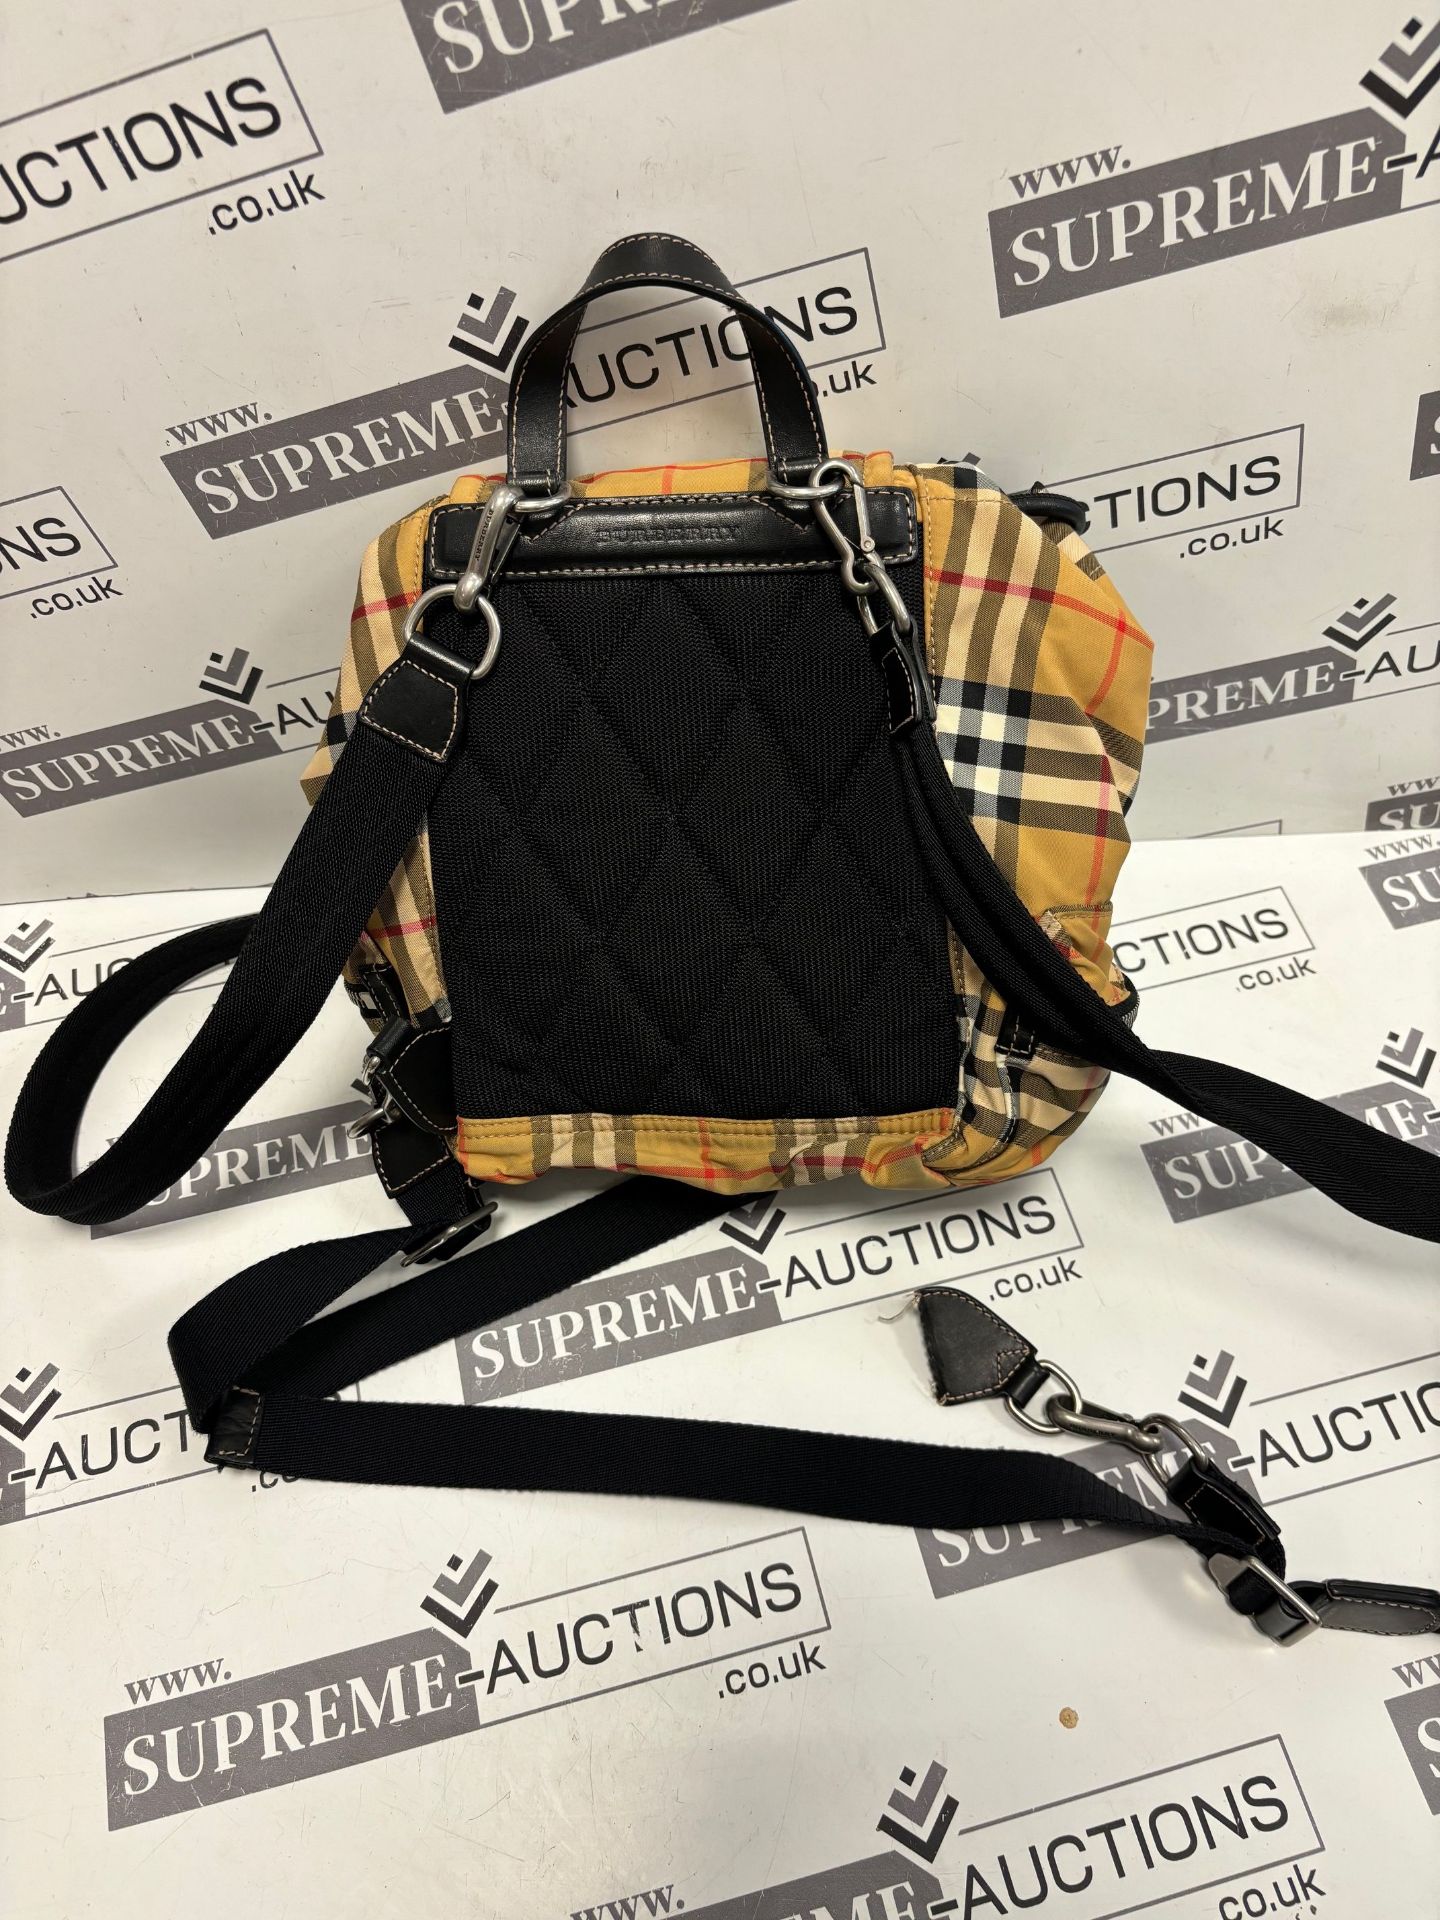 (No Vat) Burberry Small Rucksack Check Backpack. Approx 25x25cm. - Image 6 of 8